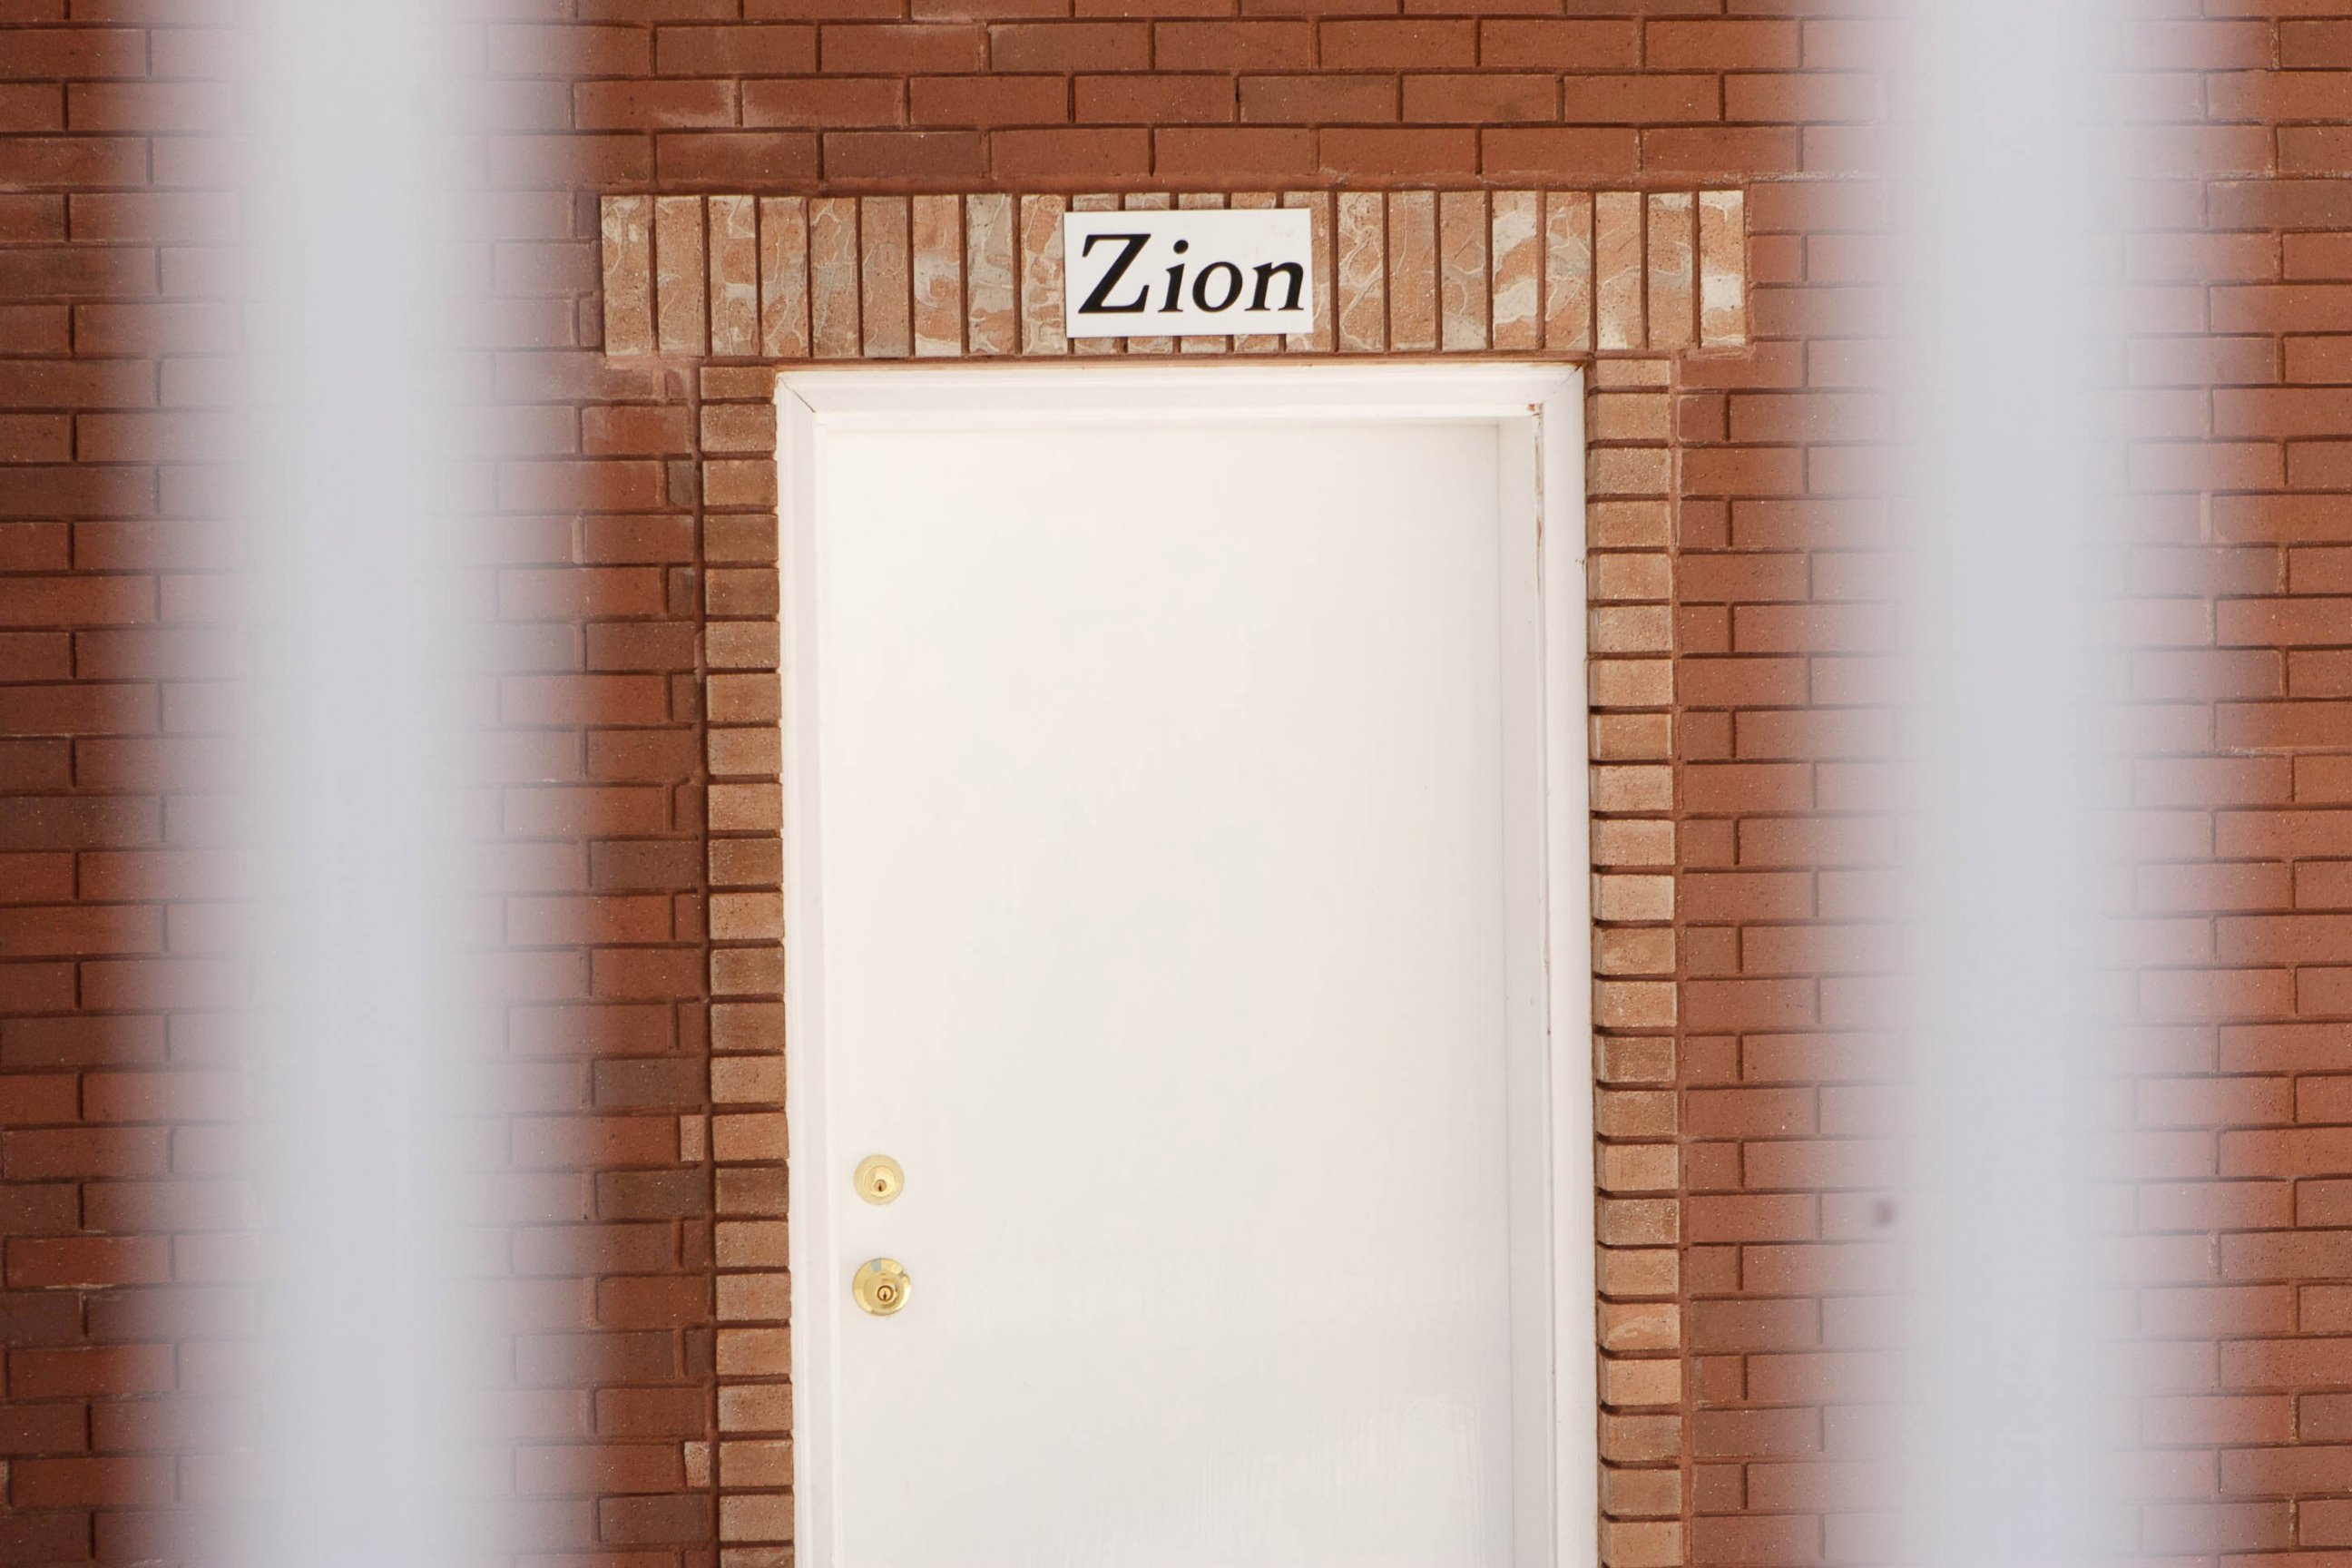 PHOTO: In this April 26, 2013 photo, a sign reads, "Zion", over the door of a home intended for the family of Warren Jeffs in Hildale, Utah.